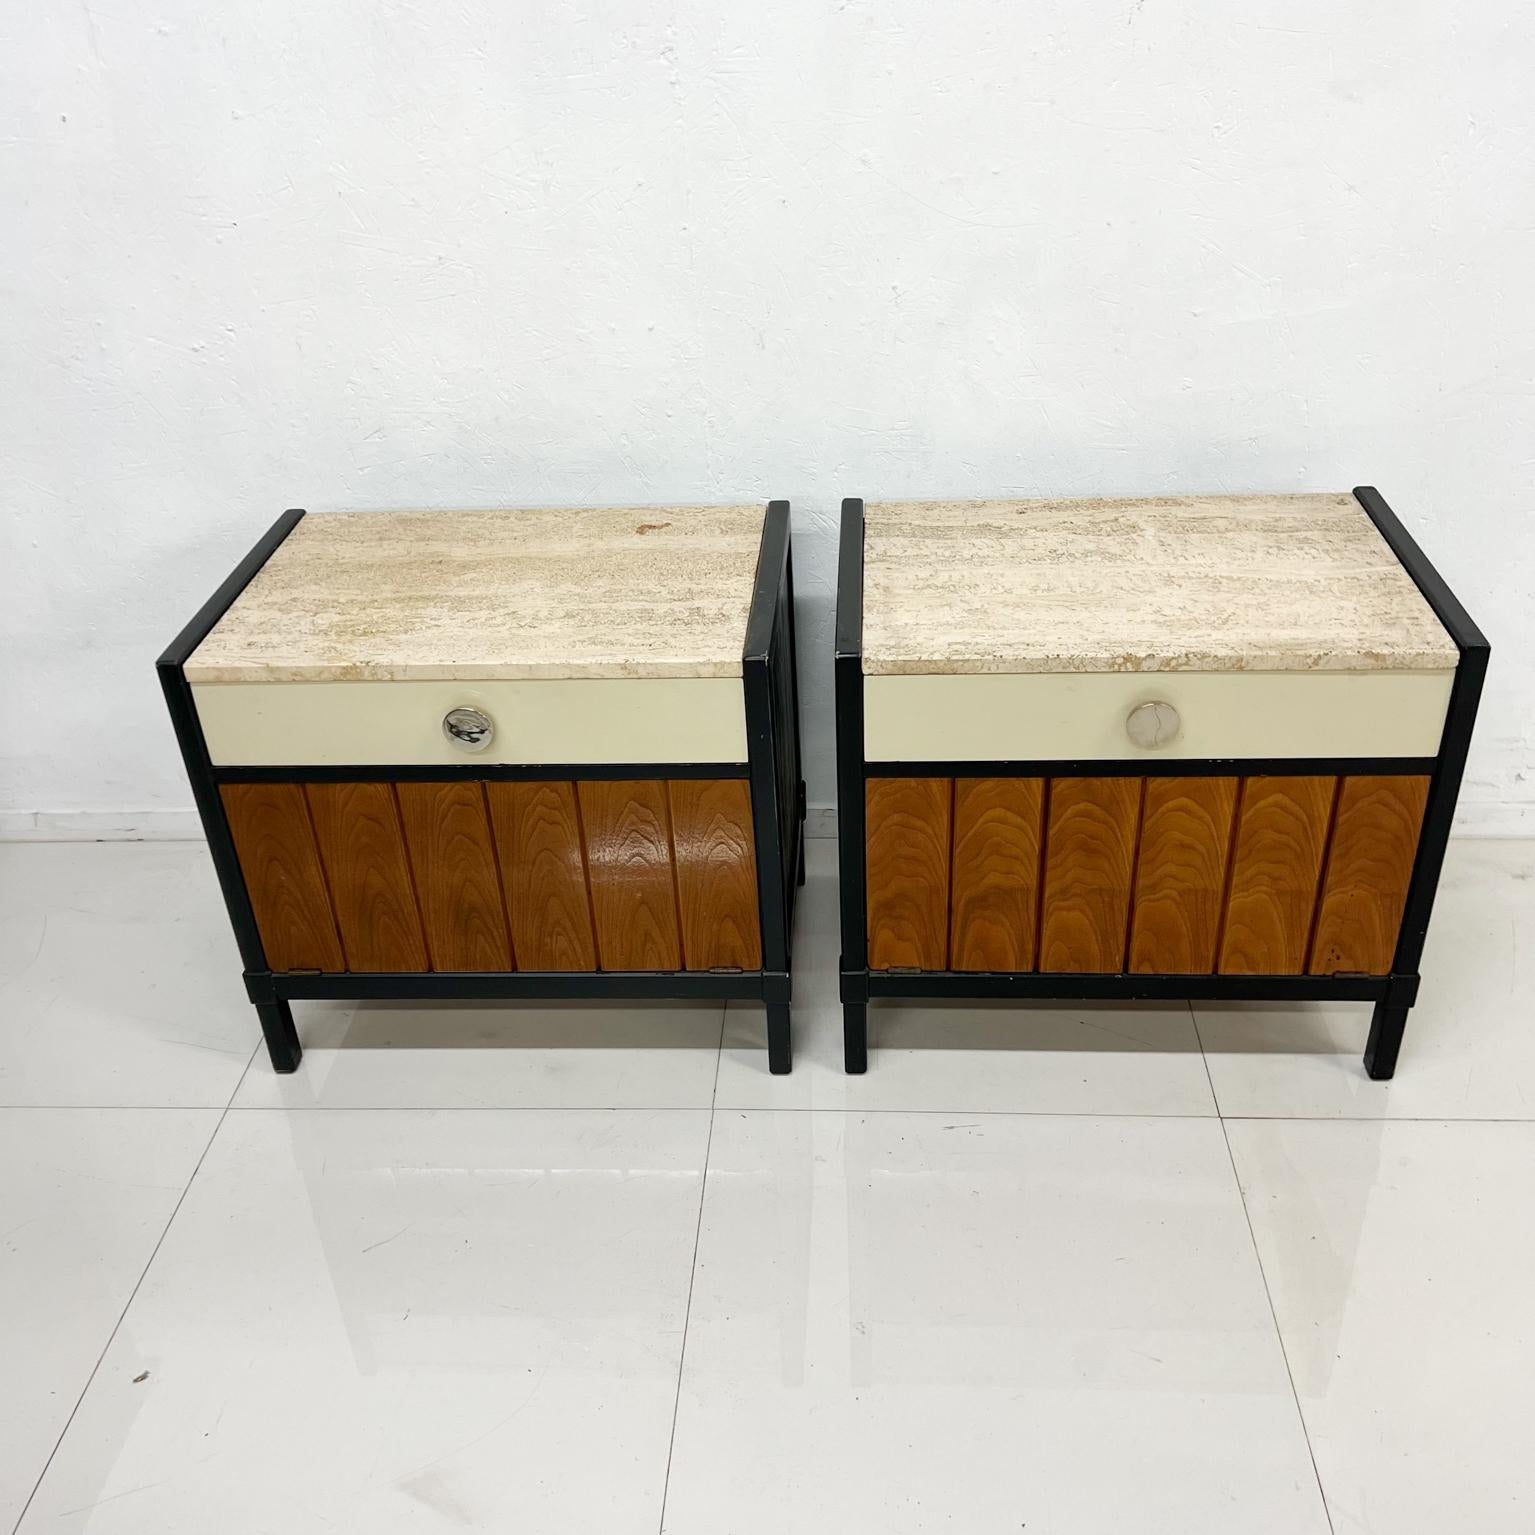 Mid-Century Modern 1960s Stylish Drexel Nightstands Two-Tone Travertine Wood Cabinet End Tables